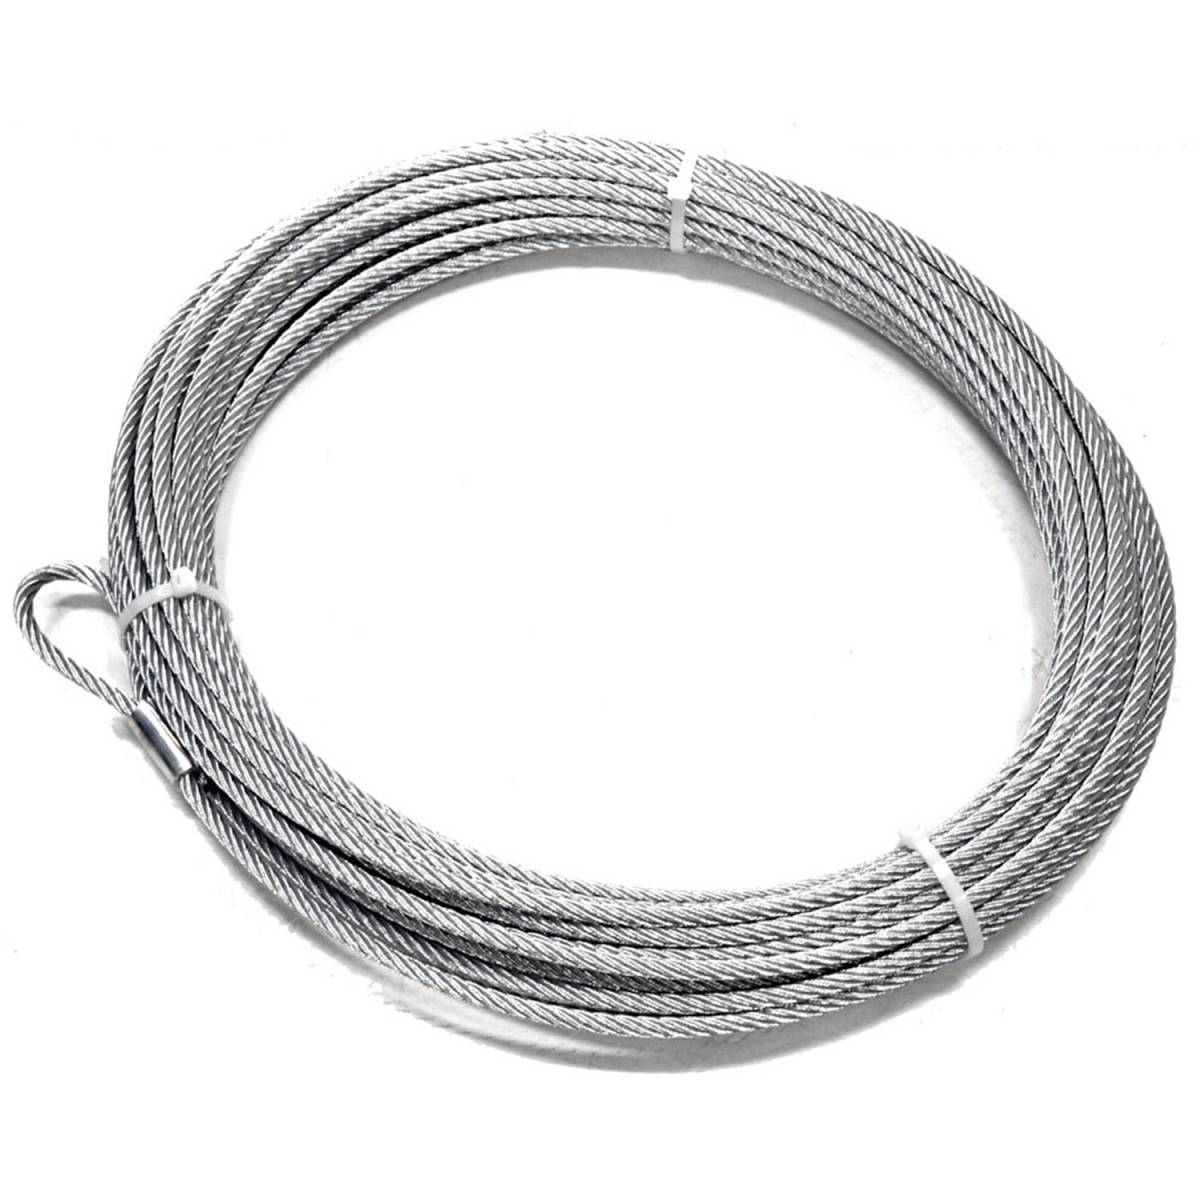  WARN 15236 Replacement Wire Winch Rope Silver, 50 feet :  Automotive